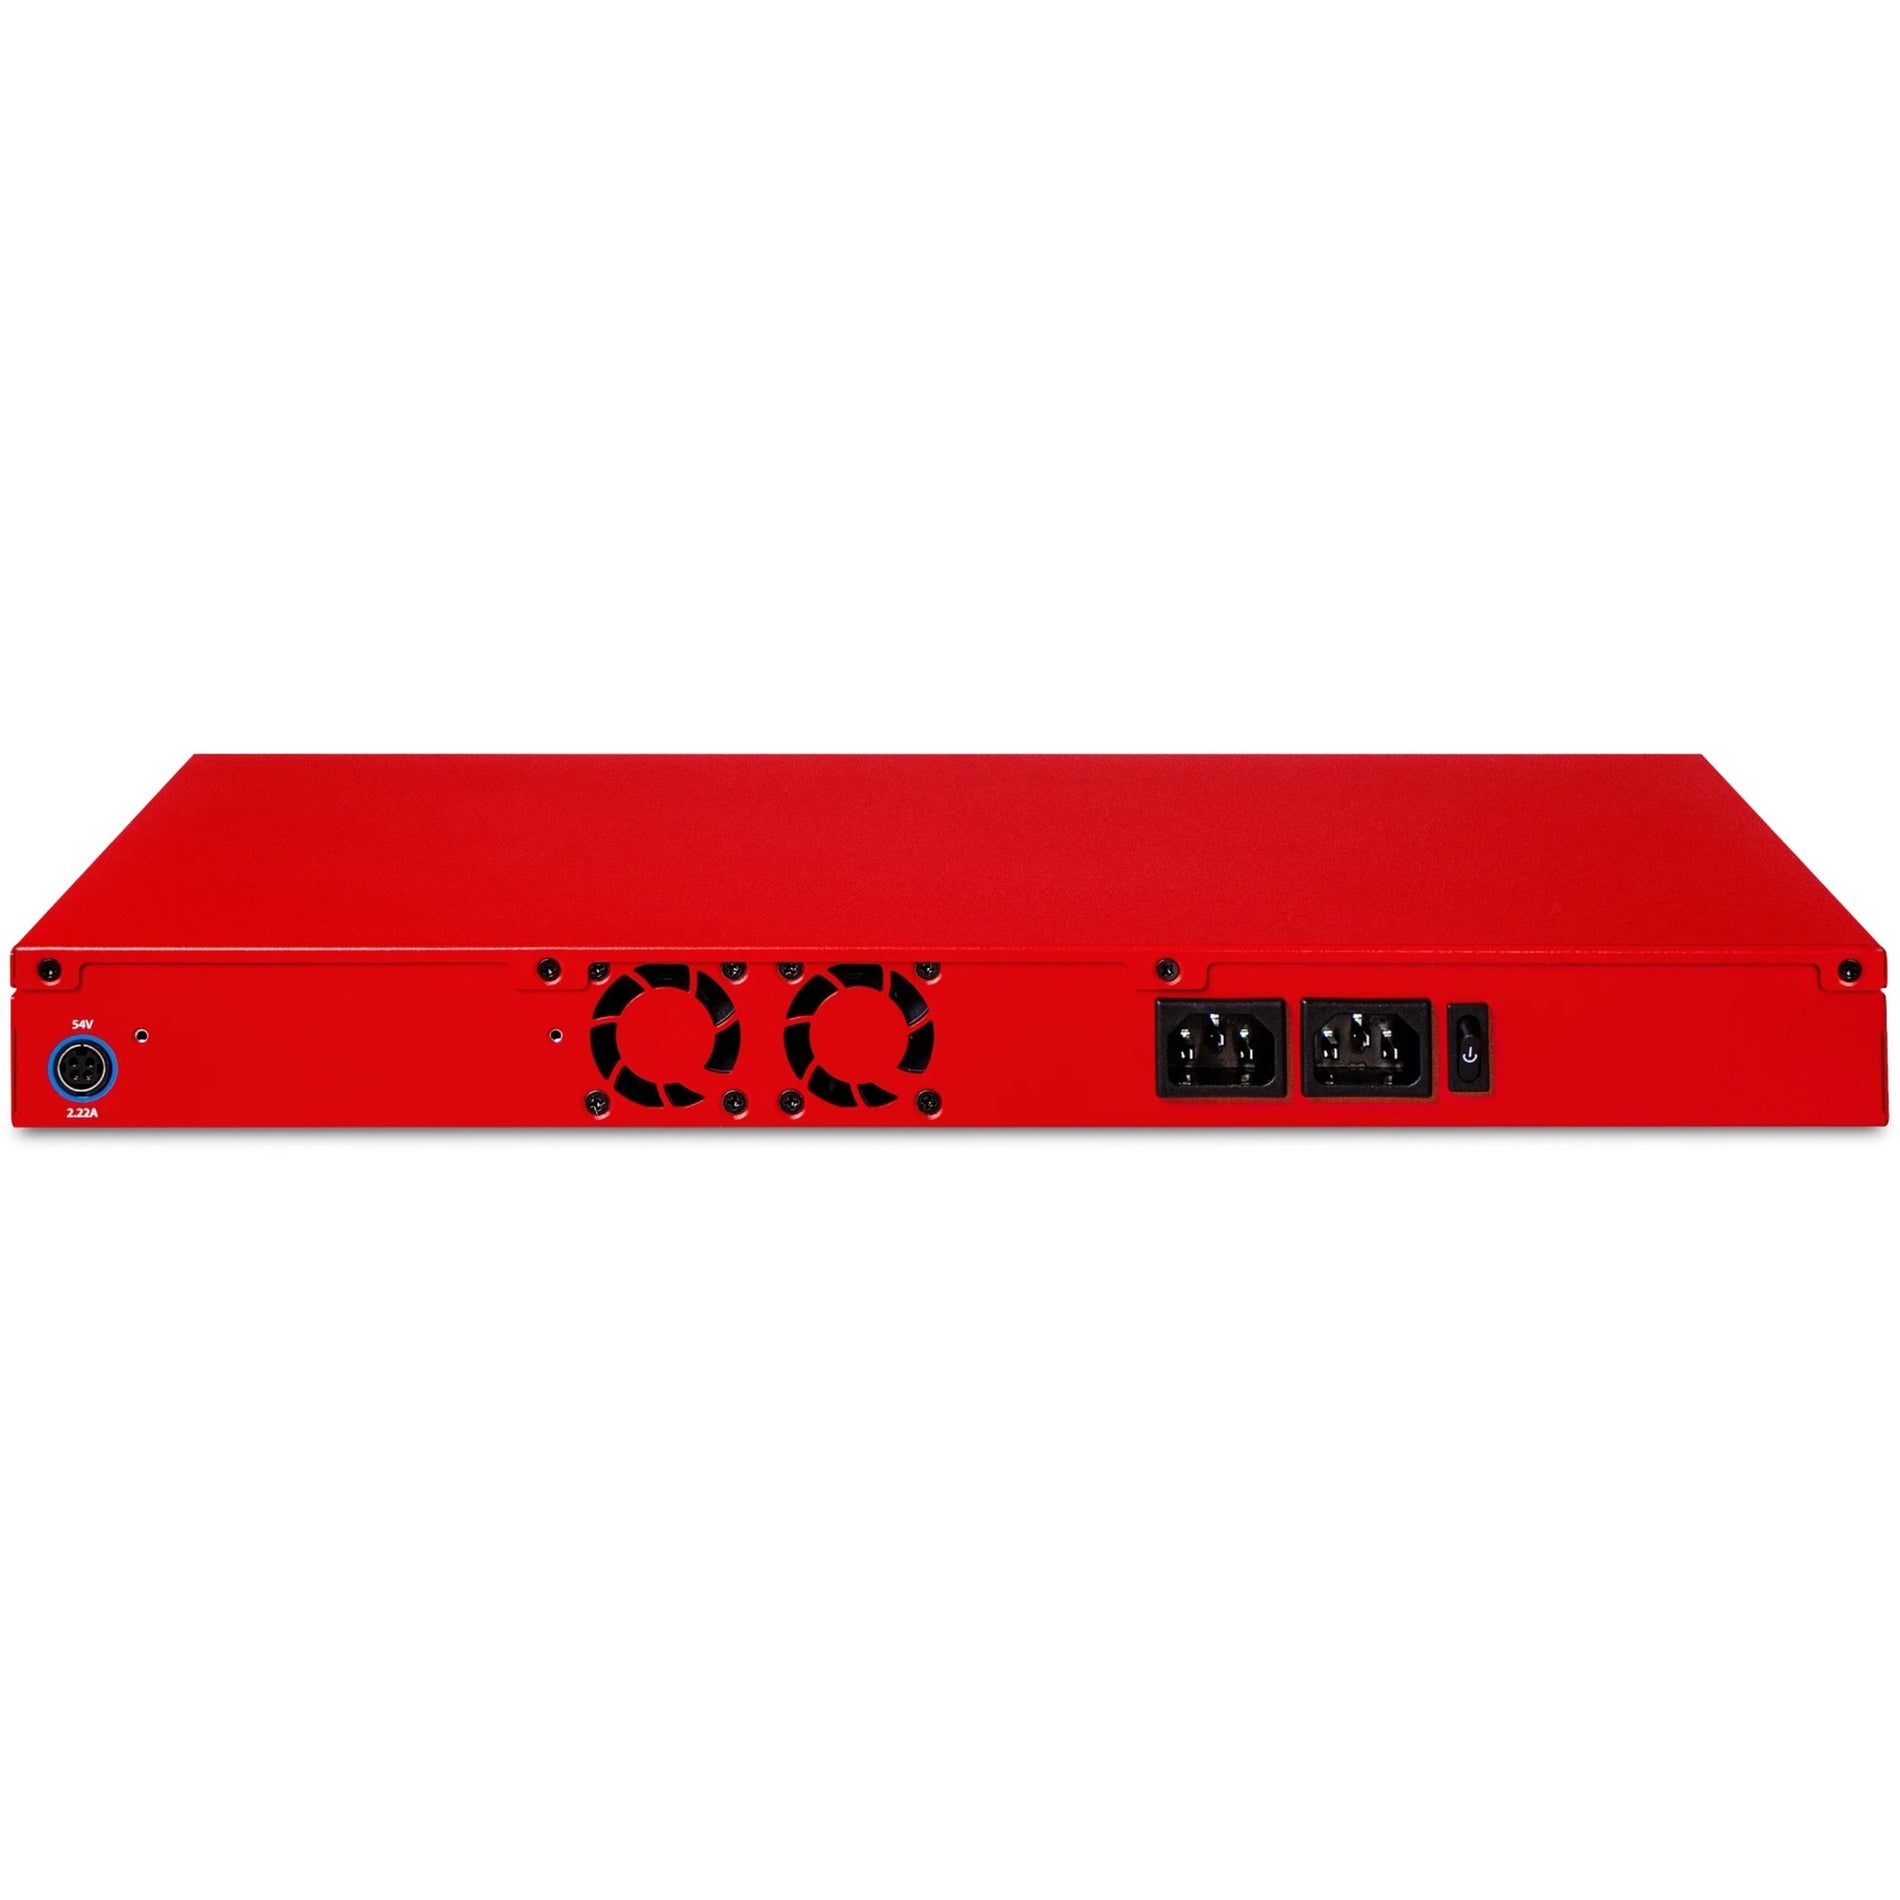 WatchGuard WGM59002003 Firebox M590 Network Security/Firewall Appliance, 8 Ports, 3-Year Basic Security Suite